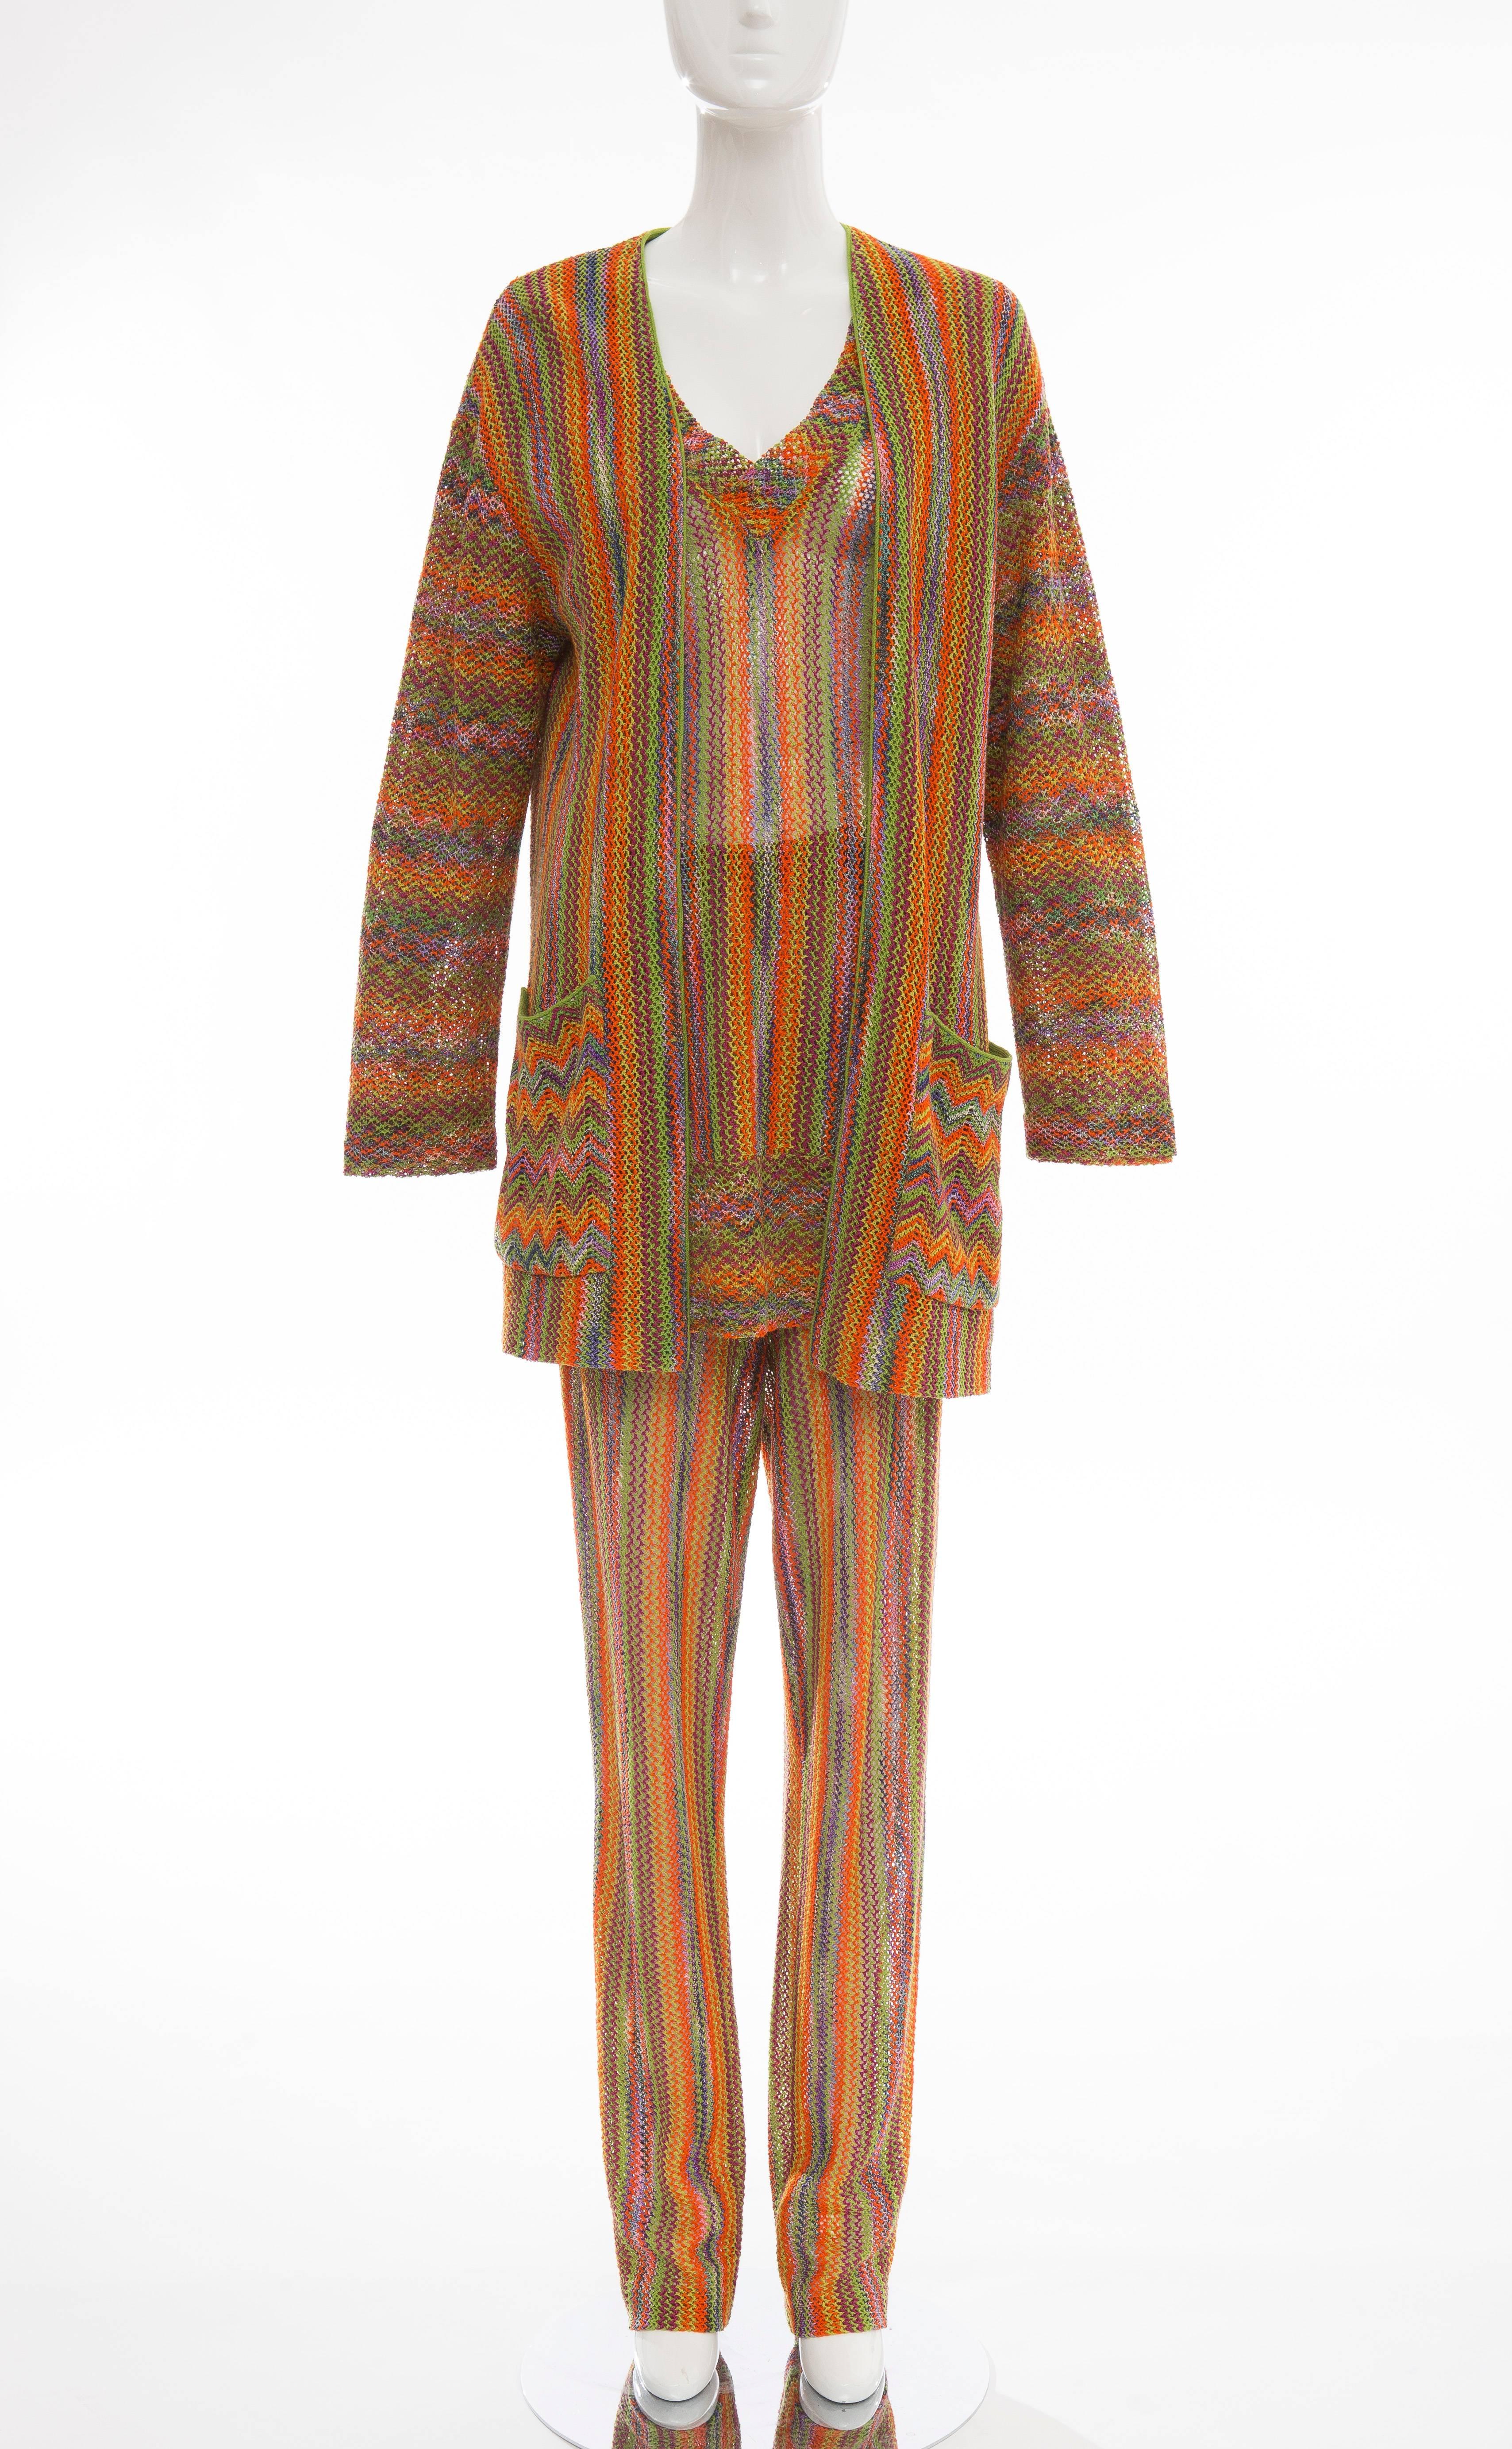 Missoni, circa 1970's, gold label rainbow striped knit pant suit ensemble. Cardigan with two front pockets, V-neck long sleeve top with elastic waist pant and matching long knit scarf.

IT. 44
US. 8

Waist, 26 up to 32
Bust, 40
Pant Length, 46.5